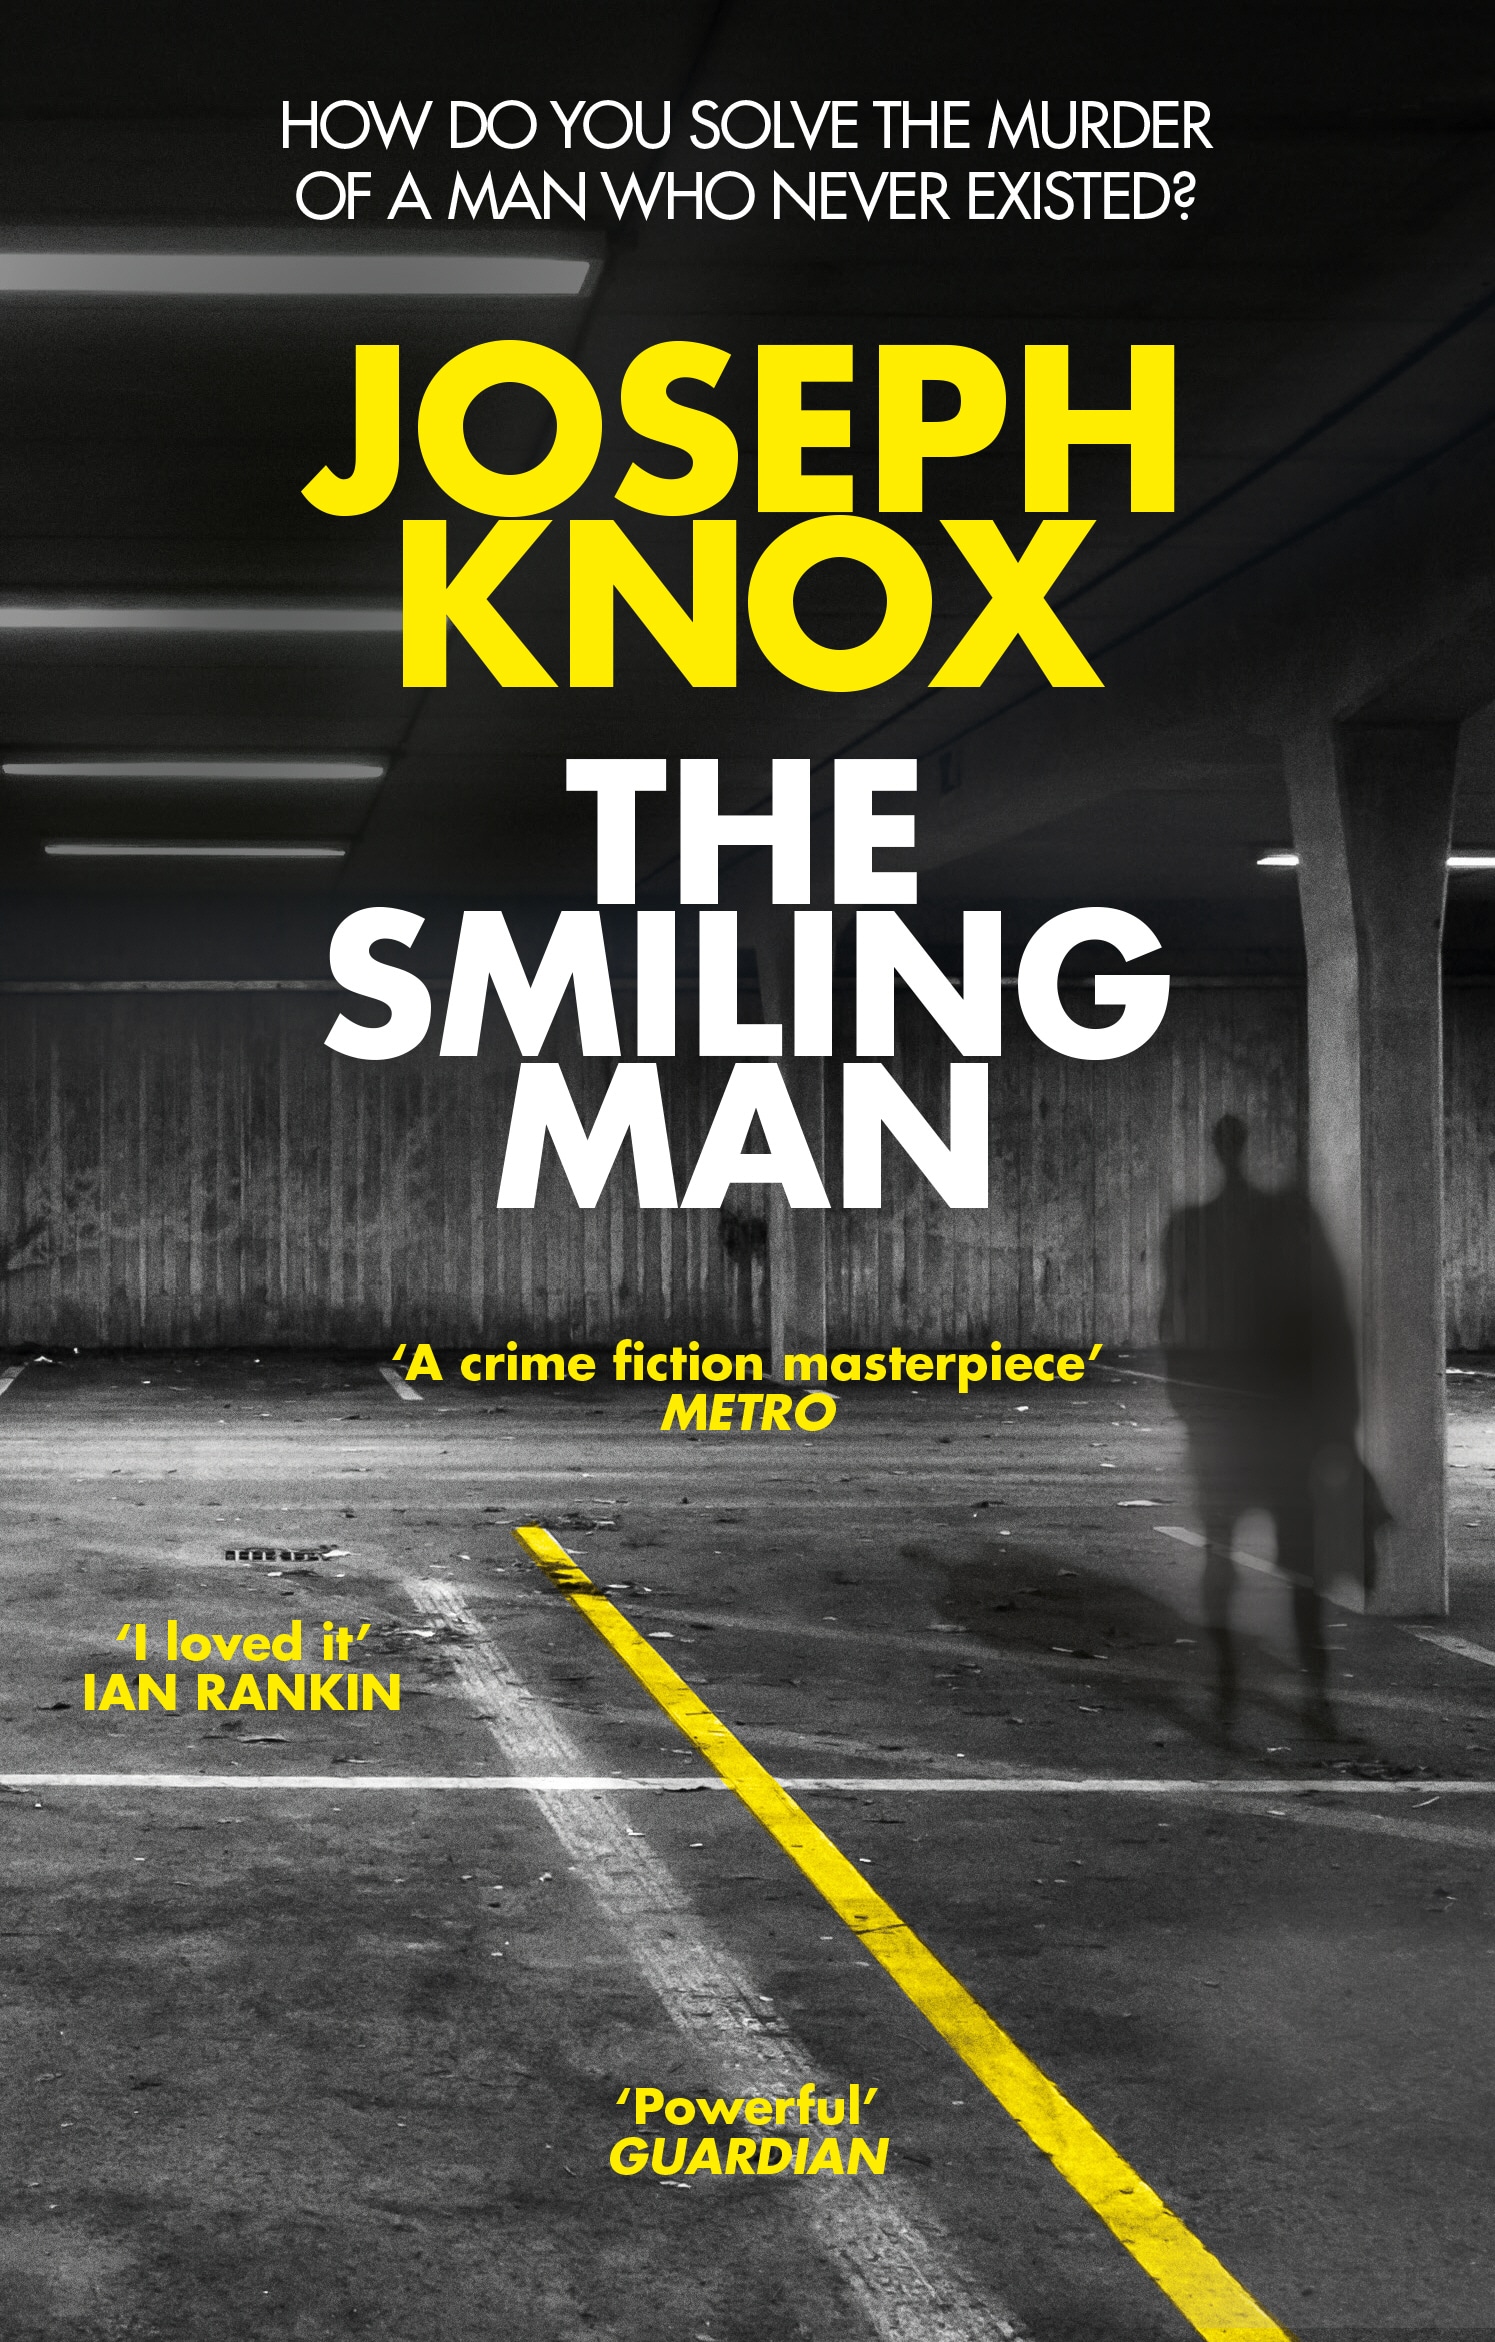 Book “The Smiling Man” by Joseph Knox — April 4, 2019